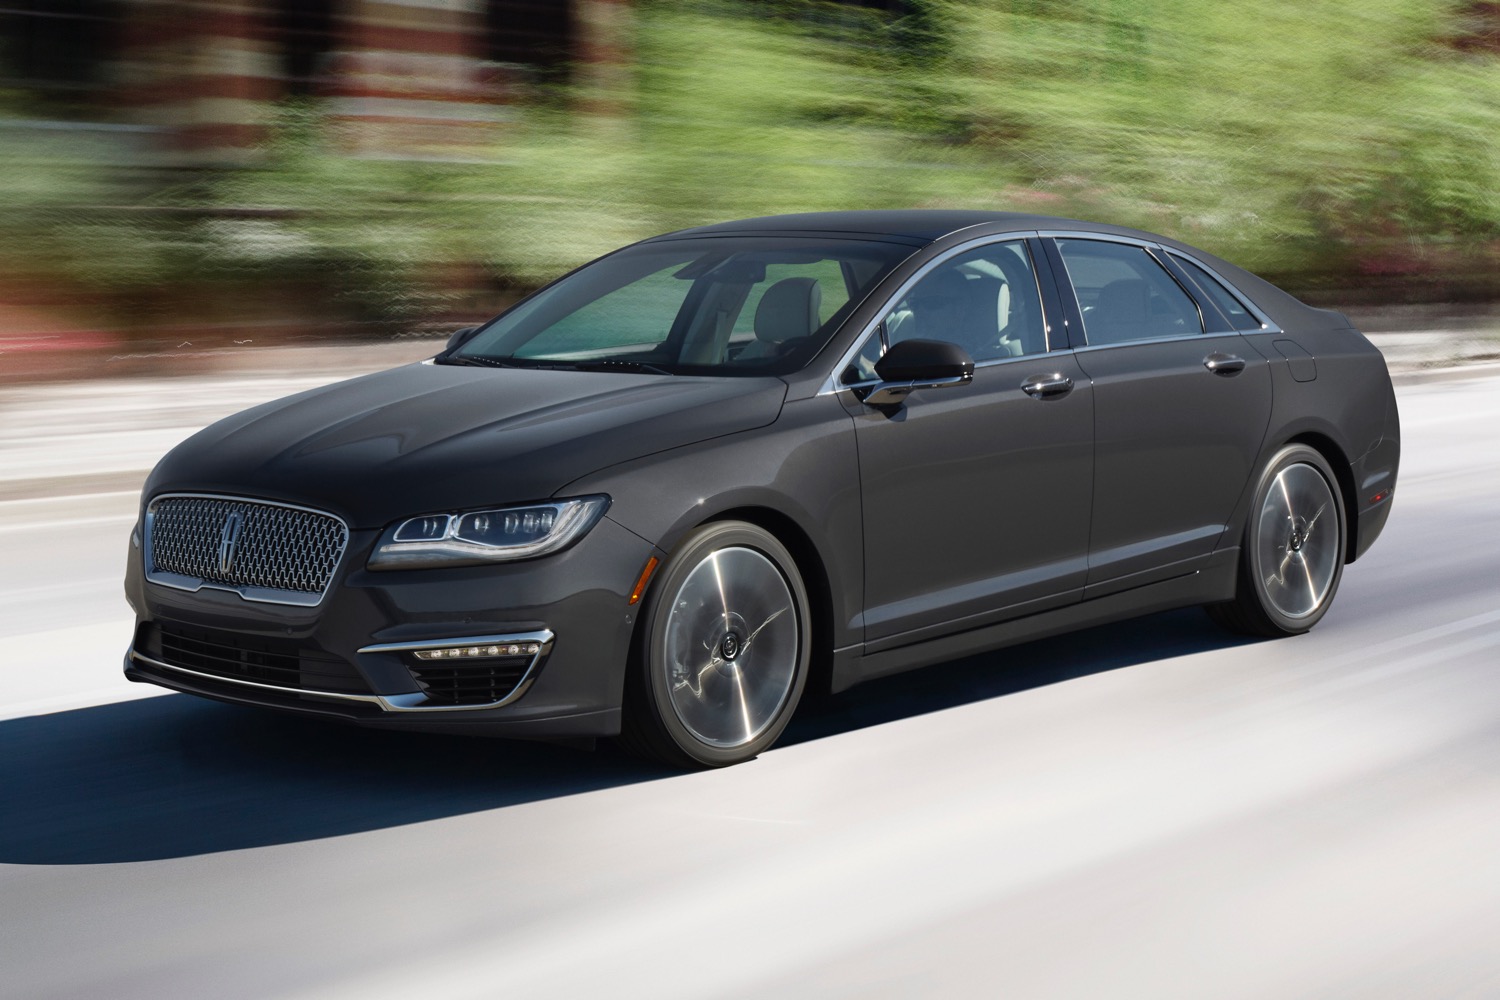 2018 Lincoln MKZ Better Used Luxury Buy Than Genesis G80